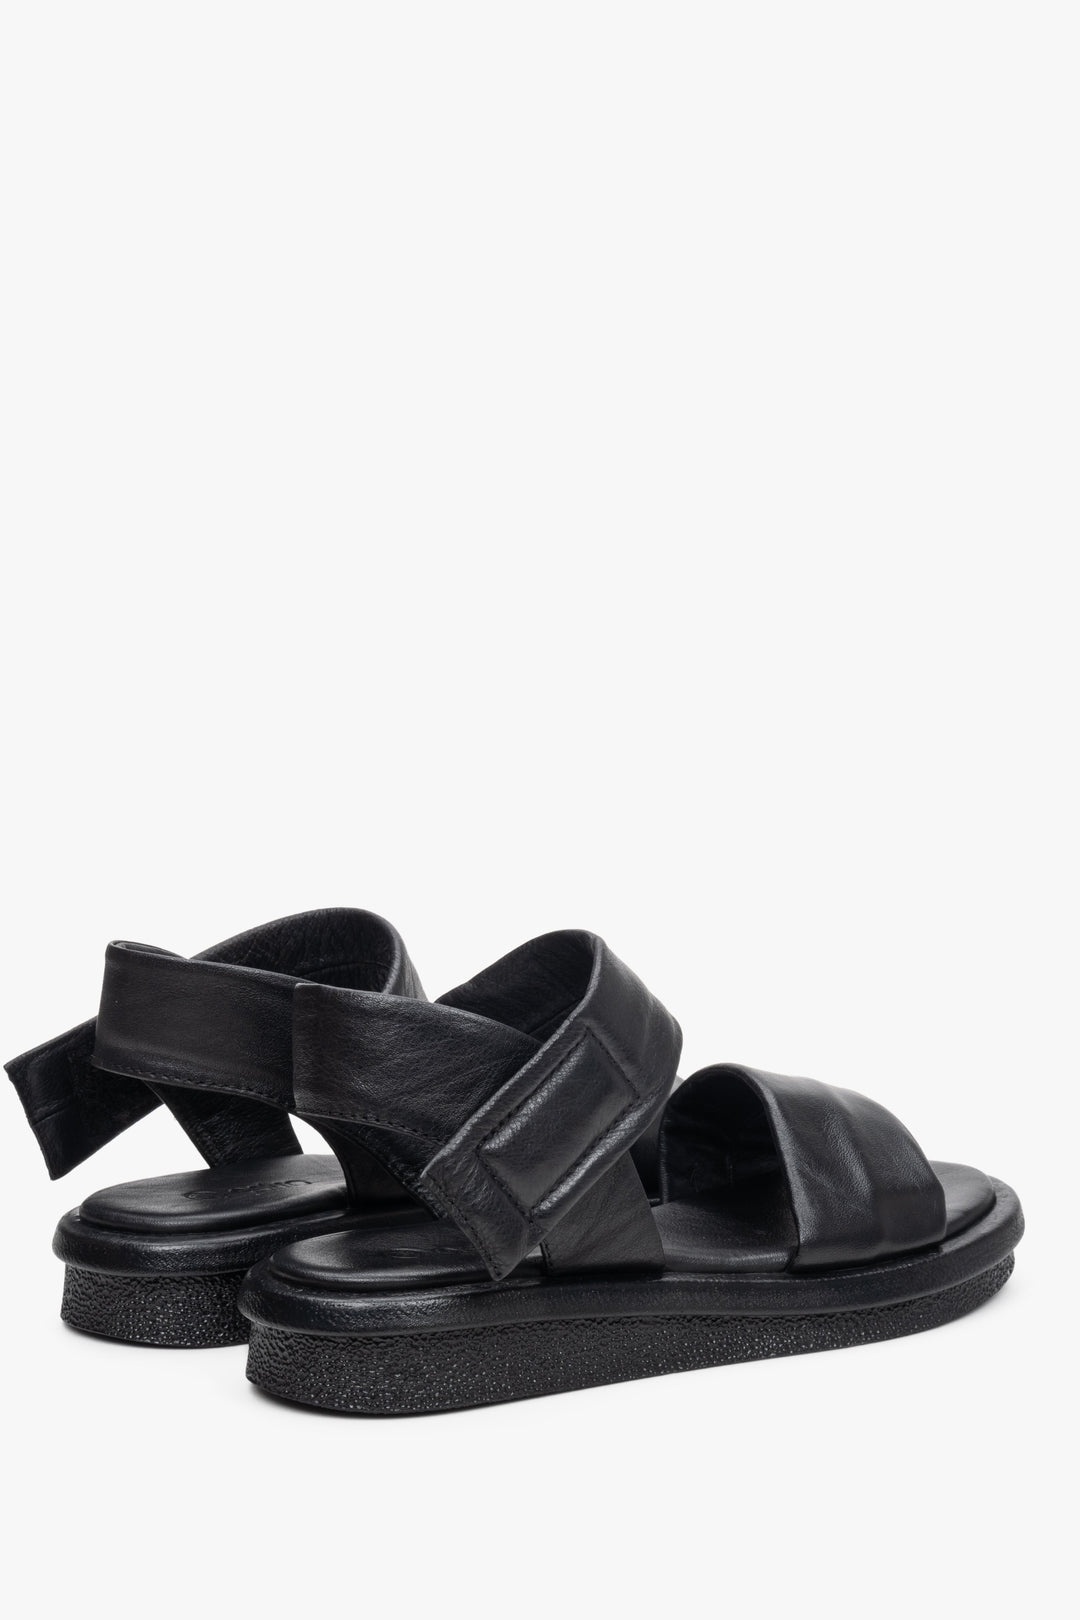 Women's sandals made of Italian natural leather on a low heel Estro - shoe profile in black.